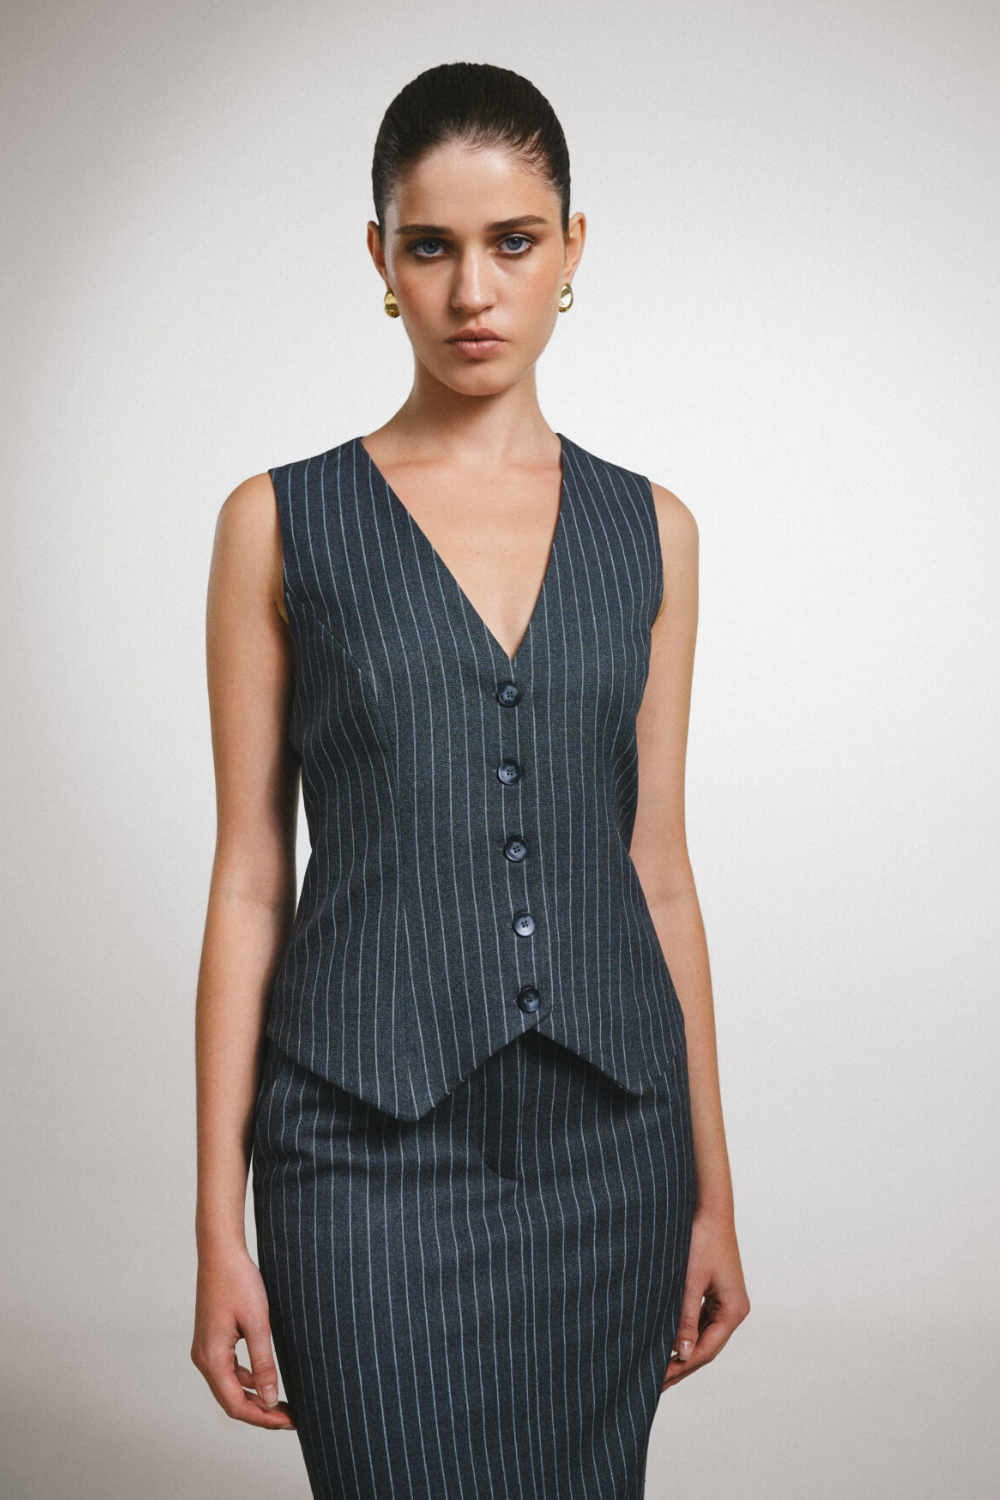 Vest made of textile material in stripes (MYxMY) 34323